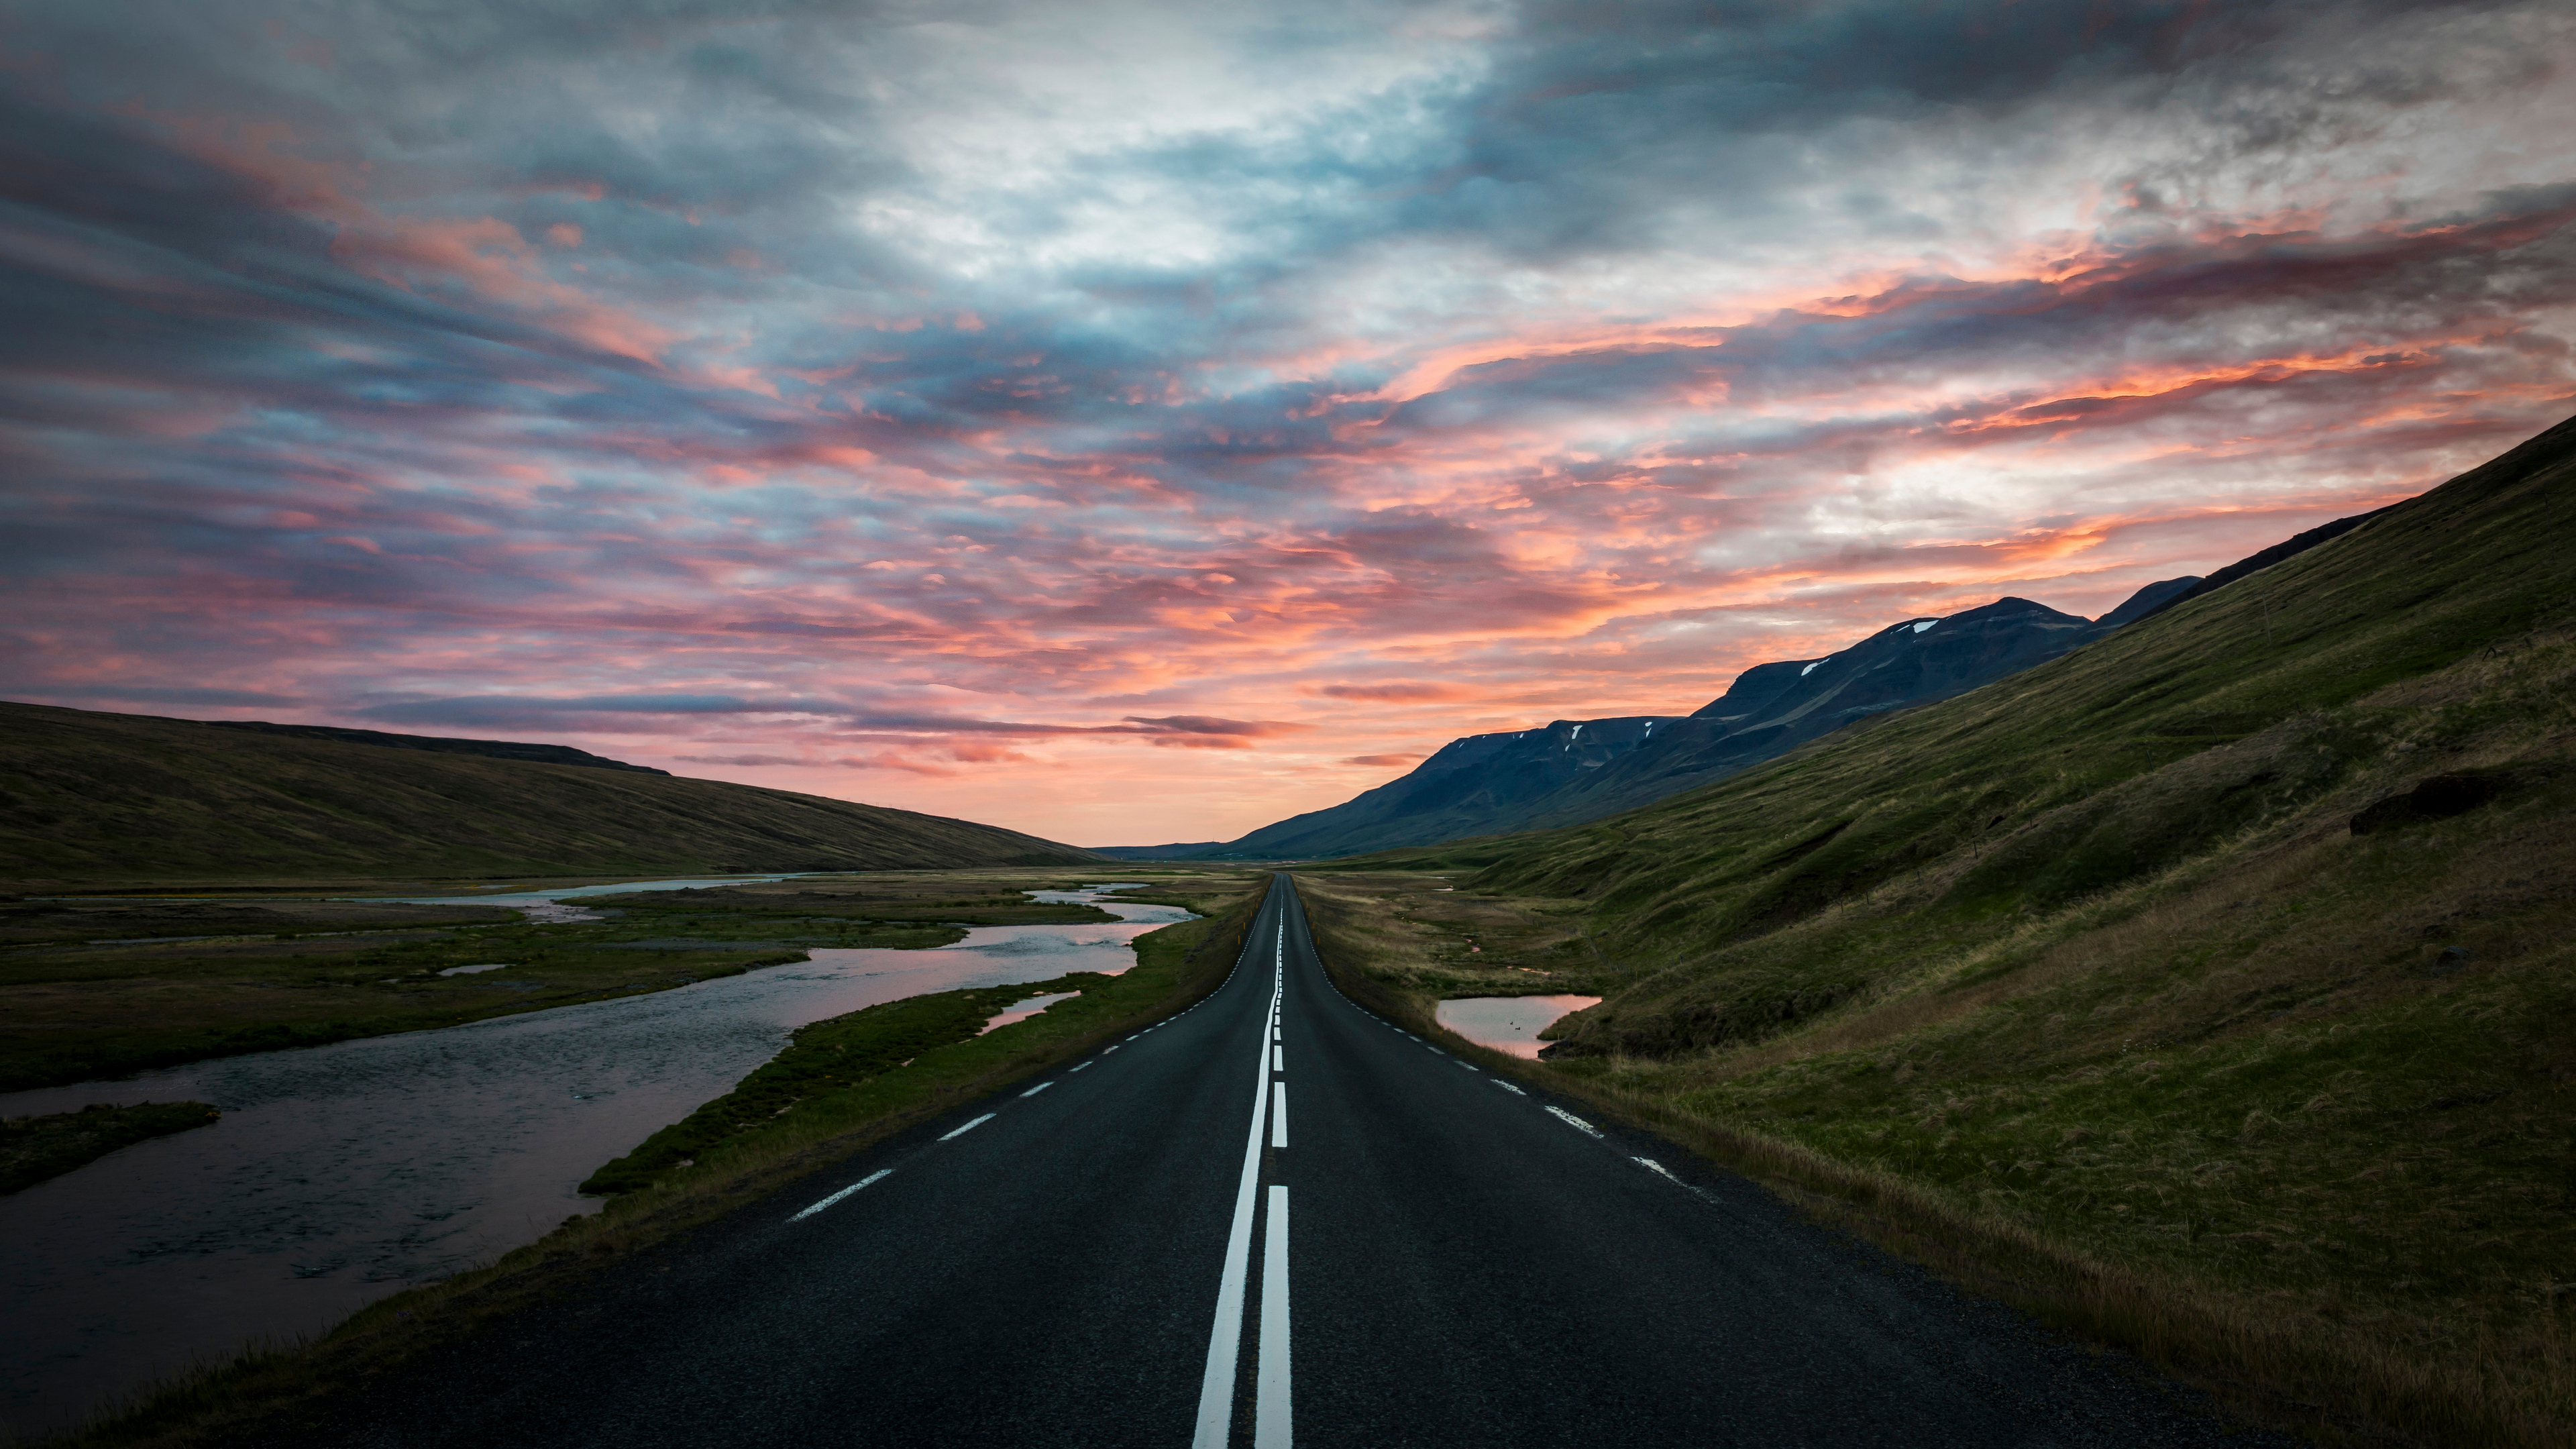 General 3840x2160 landscape Iceland Trey Ratcliff photography nature road mountains hills water sunset glow clouds sky